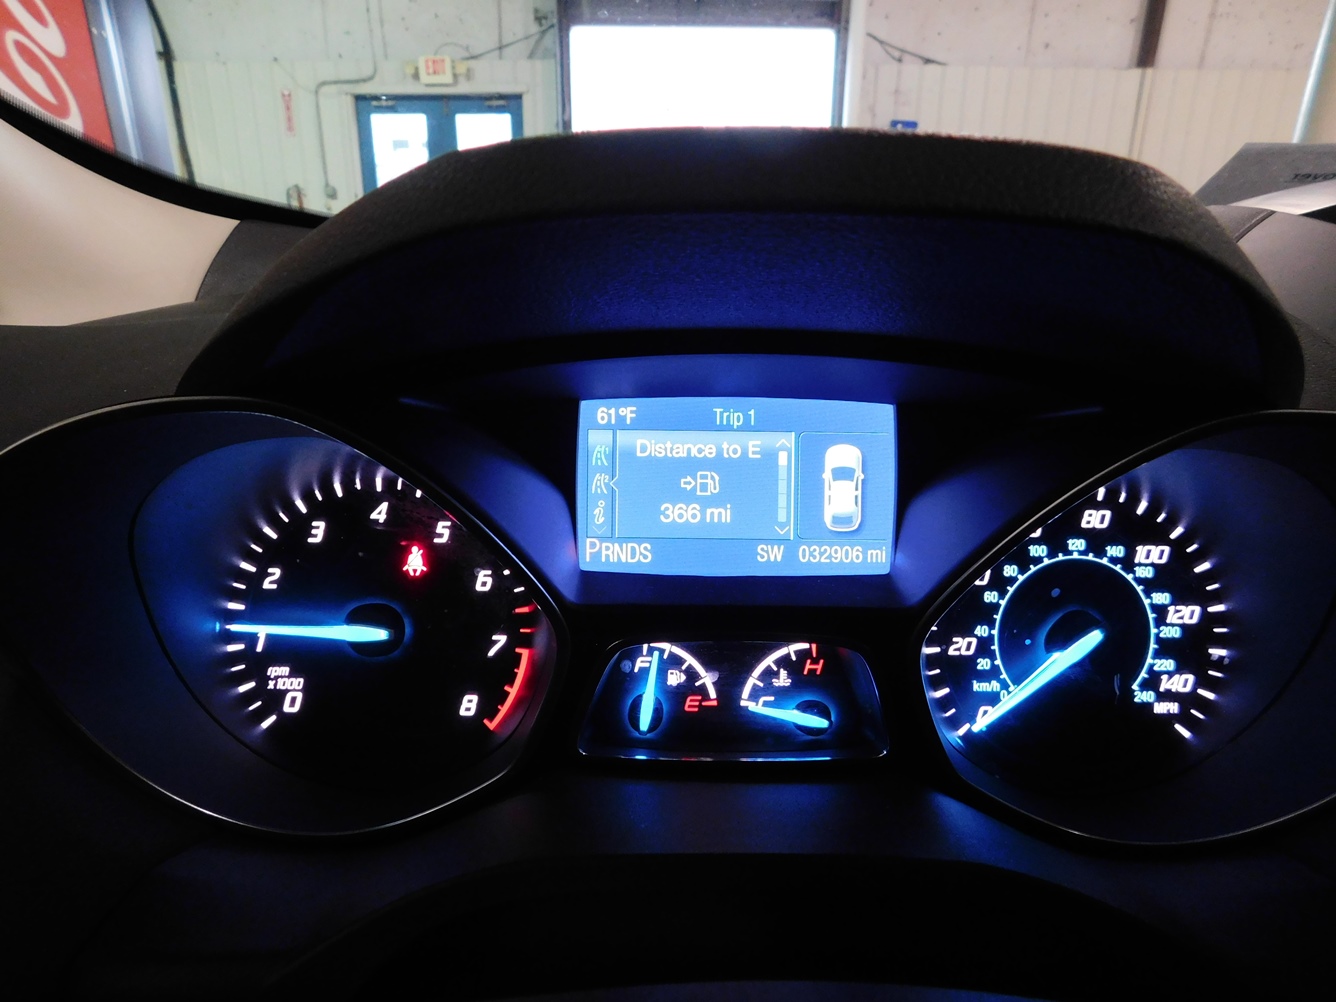 Dashboard of 2014 Ford Escape SUV Featured at Goodwill Auto Auction